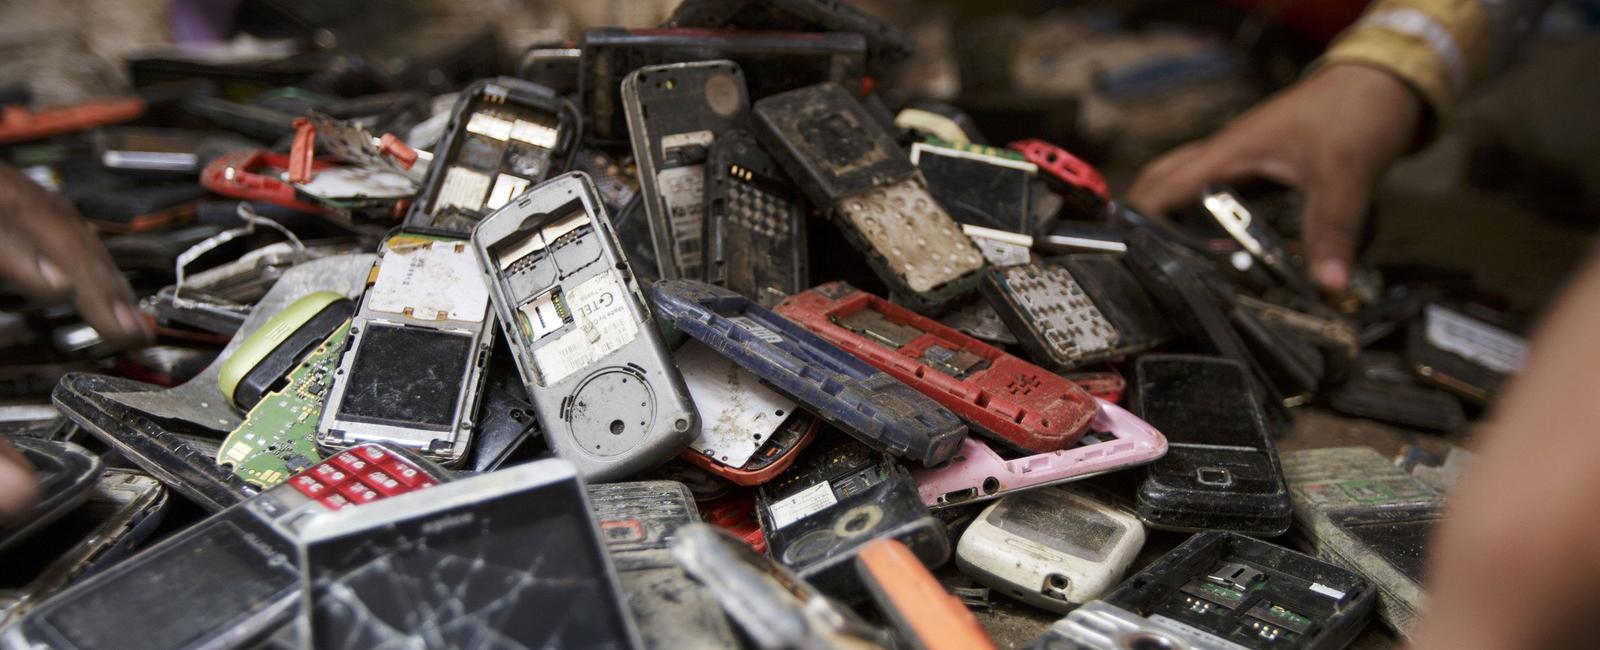 Cell phones are made with precious metals when 1 million cell phones are recycled 35 000 lbs copper 772 lbs silver 75 lbs gold and 33 lbs palladium are recovered